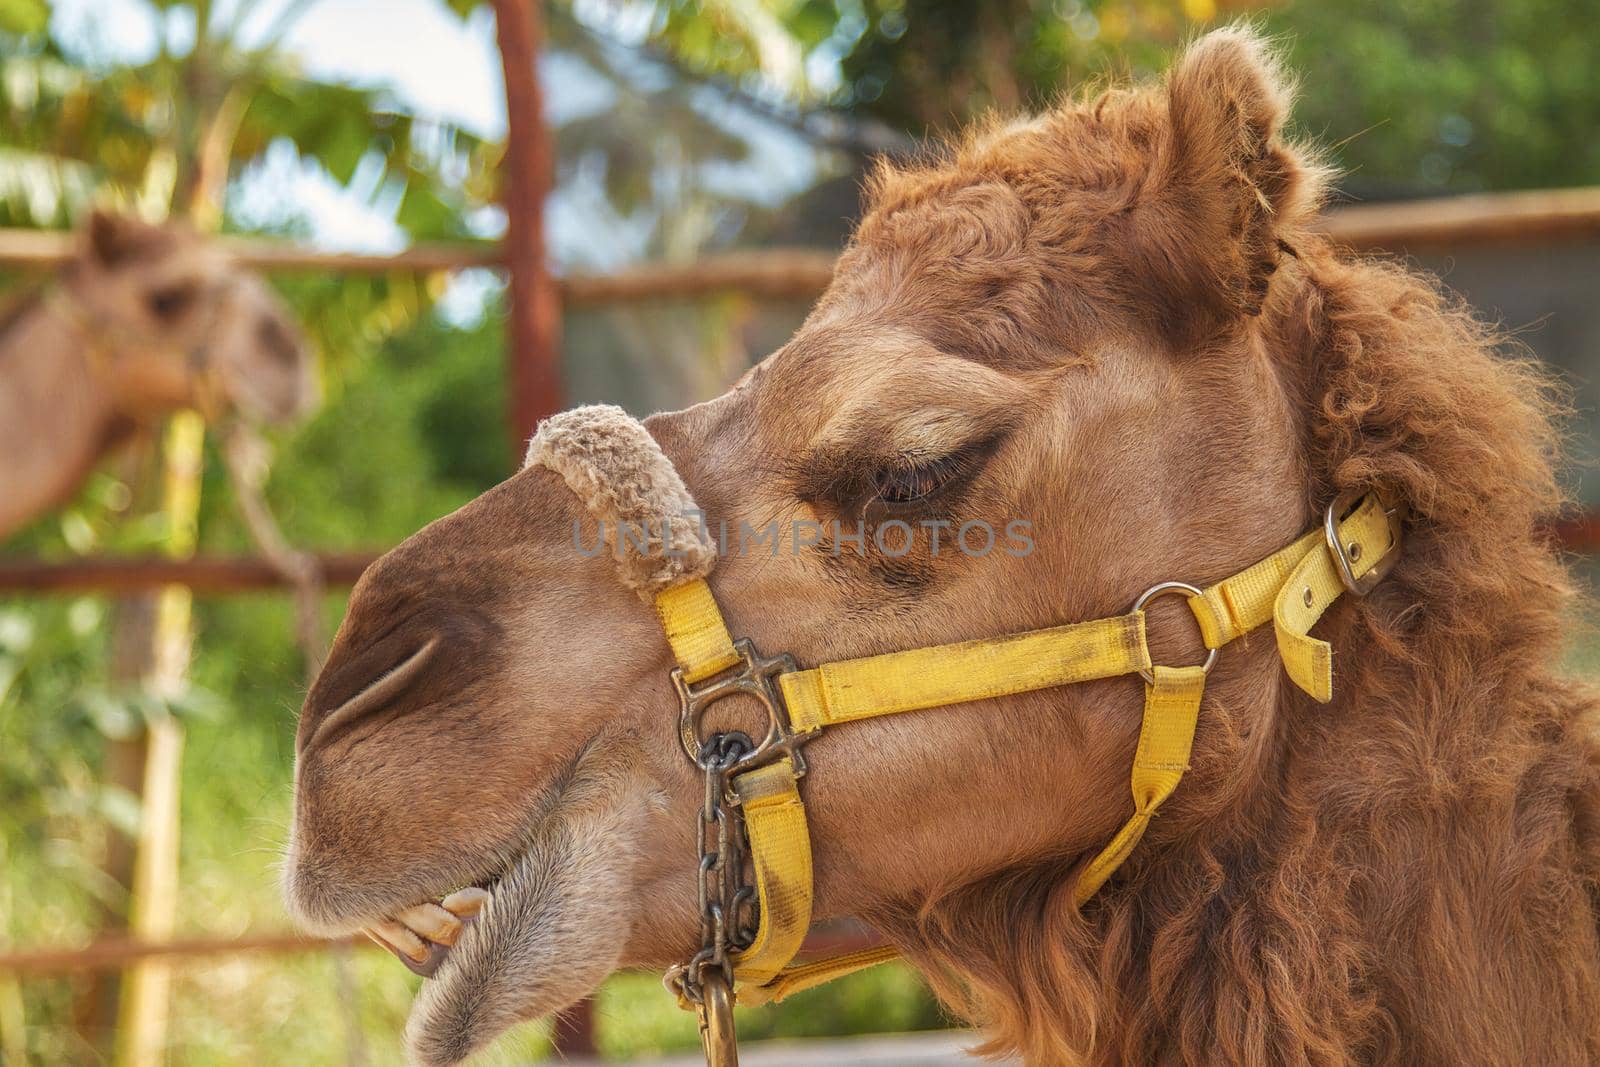 The Facial Expression of a Camel in Cozumel Mexico.